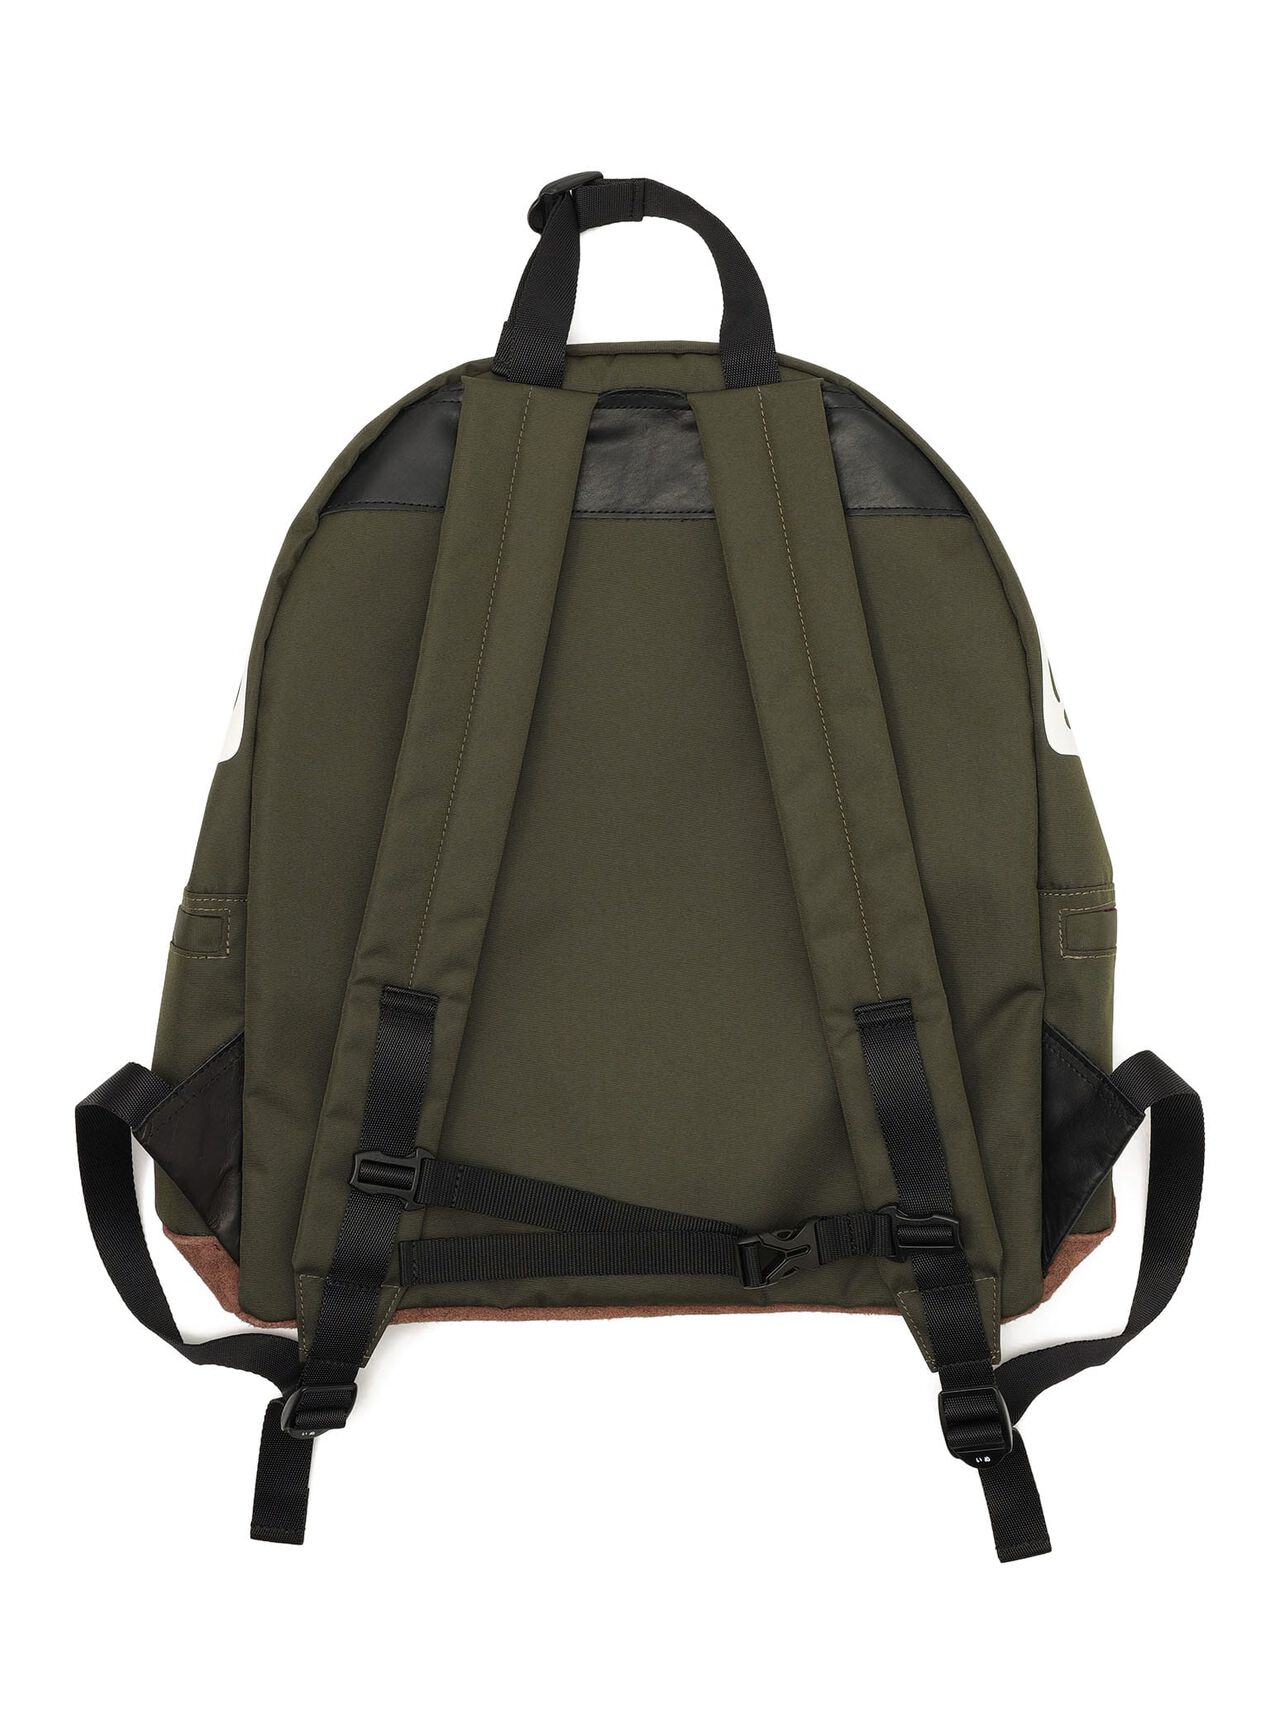 CUNE backpack L in Cordura R with leather bottom,ONE, large image number 7